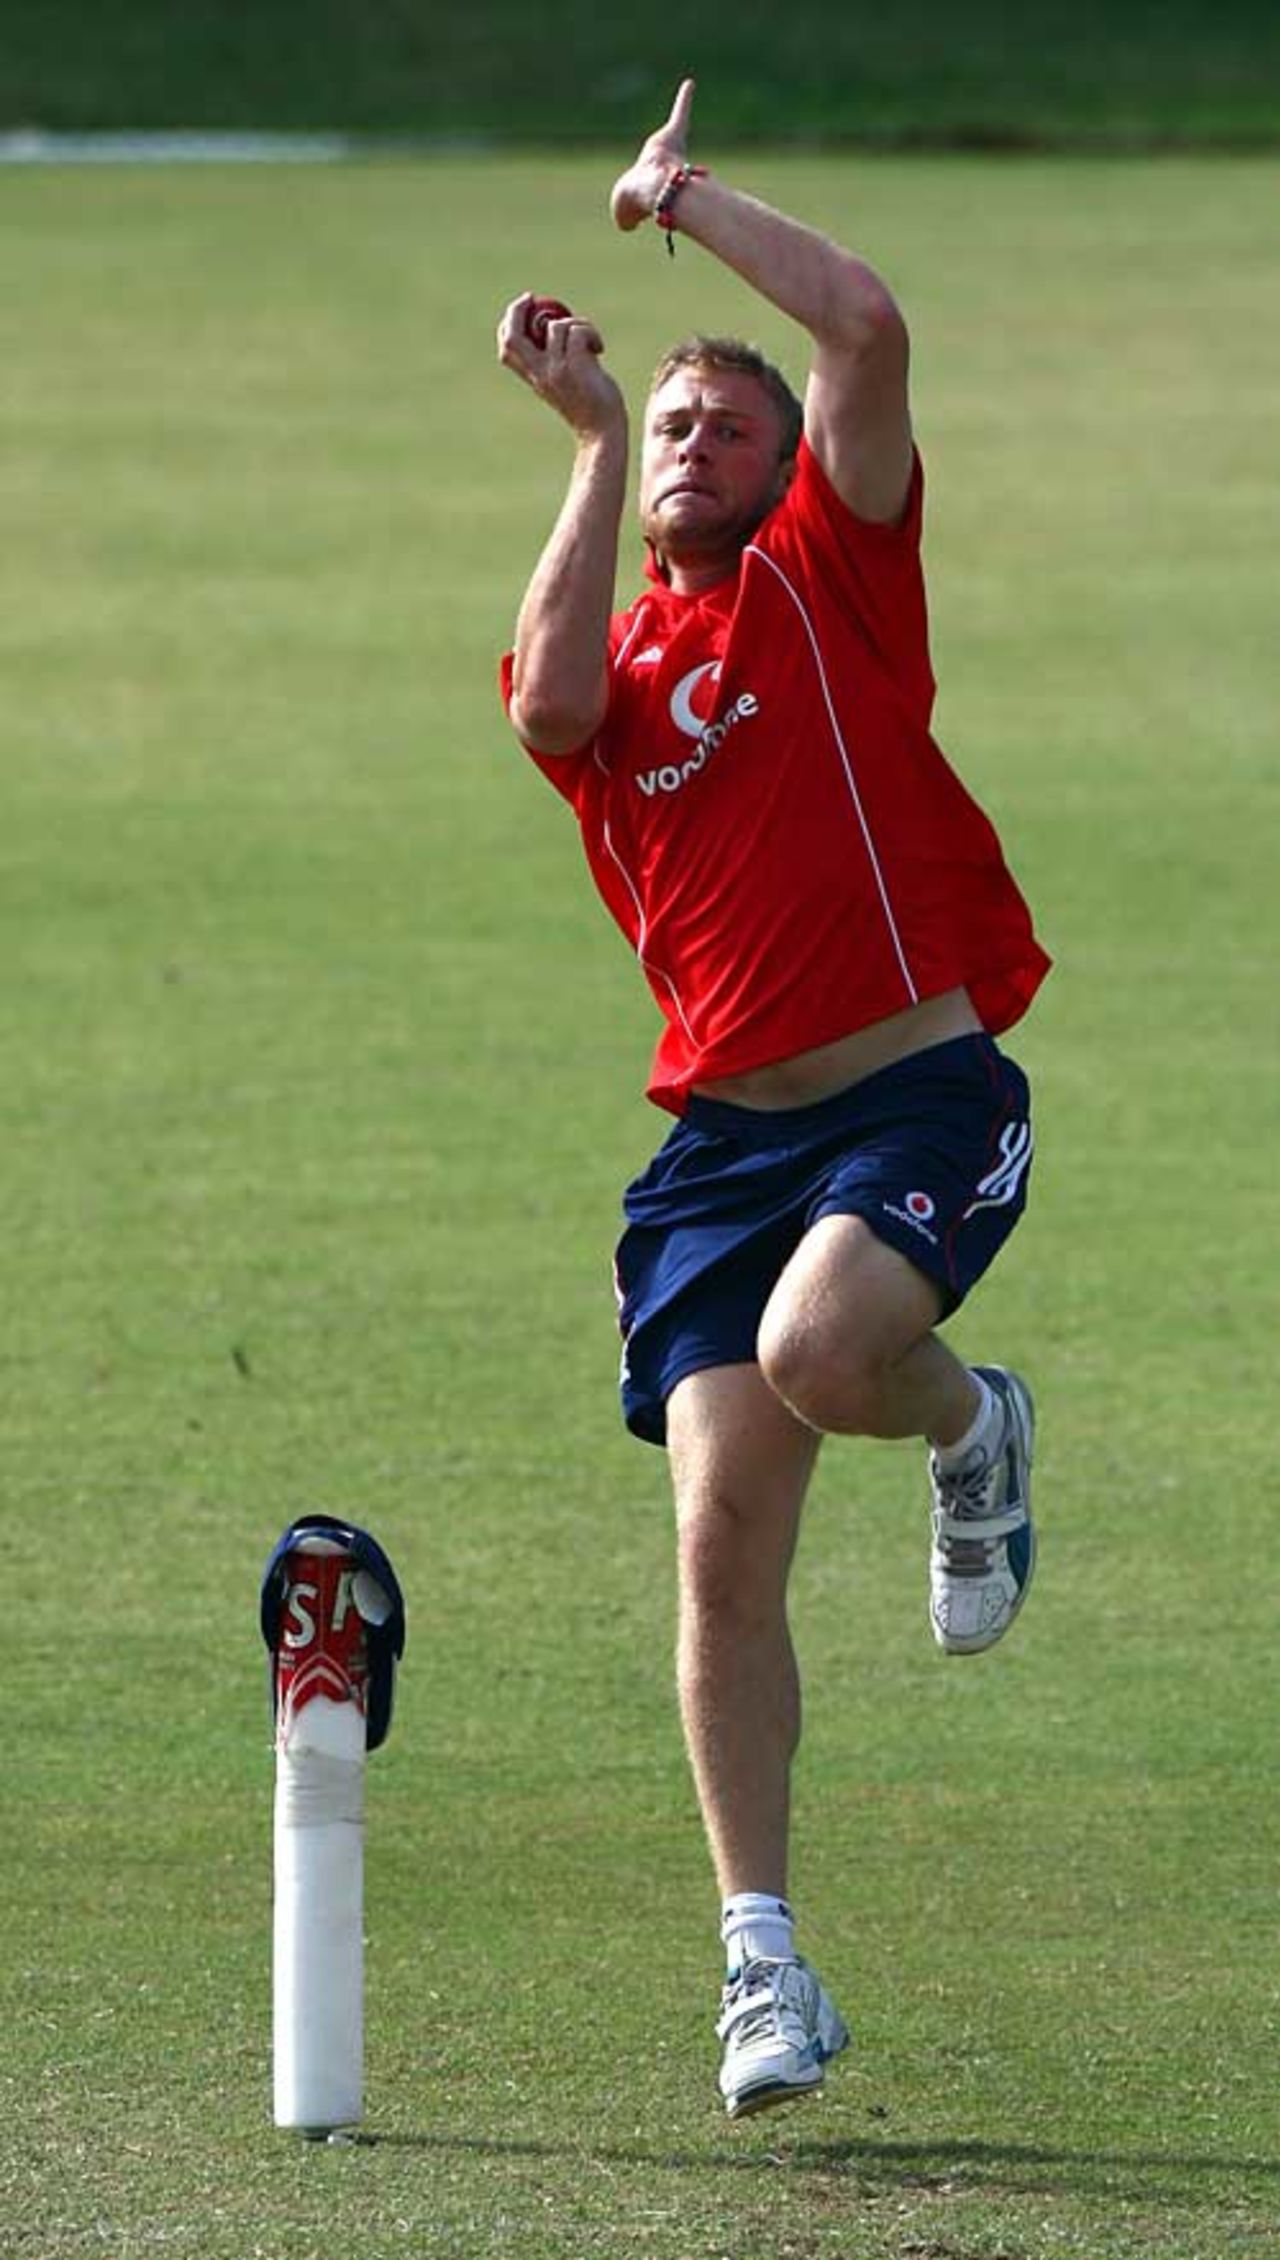 Andrew Flintoff bowled six overs at increasing pace during an early-morning practice, West Indies A v England XI, Warner Park, January 31, 2009